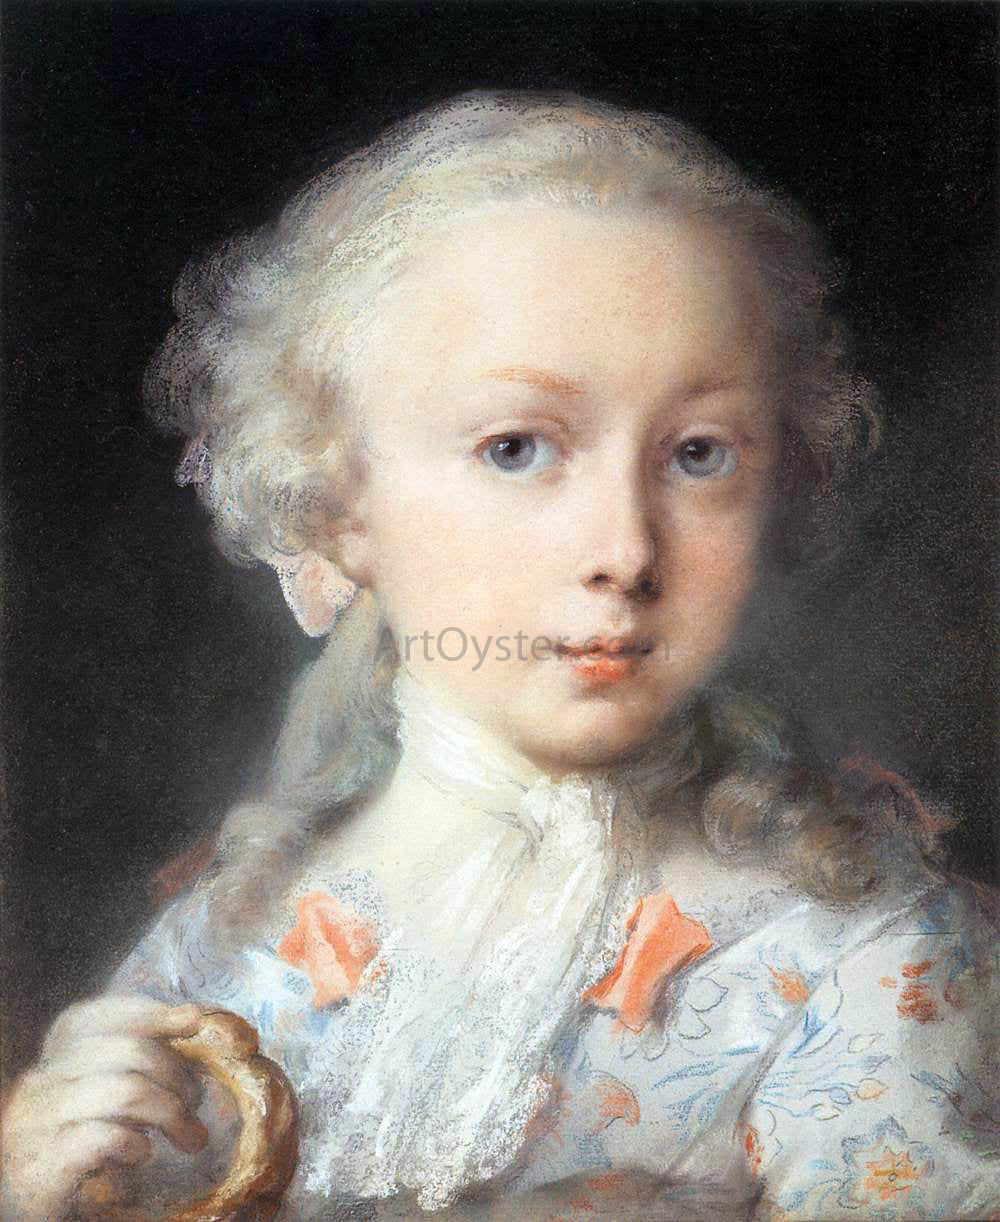  Rosalba Carriera Young Lady of the Le Blond Family - Hand Painted Oil Painting